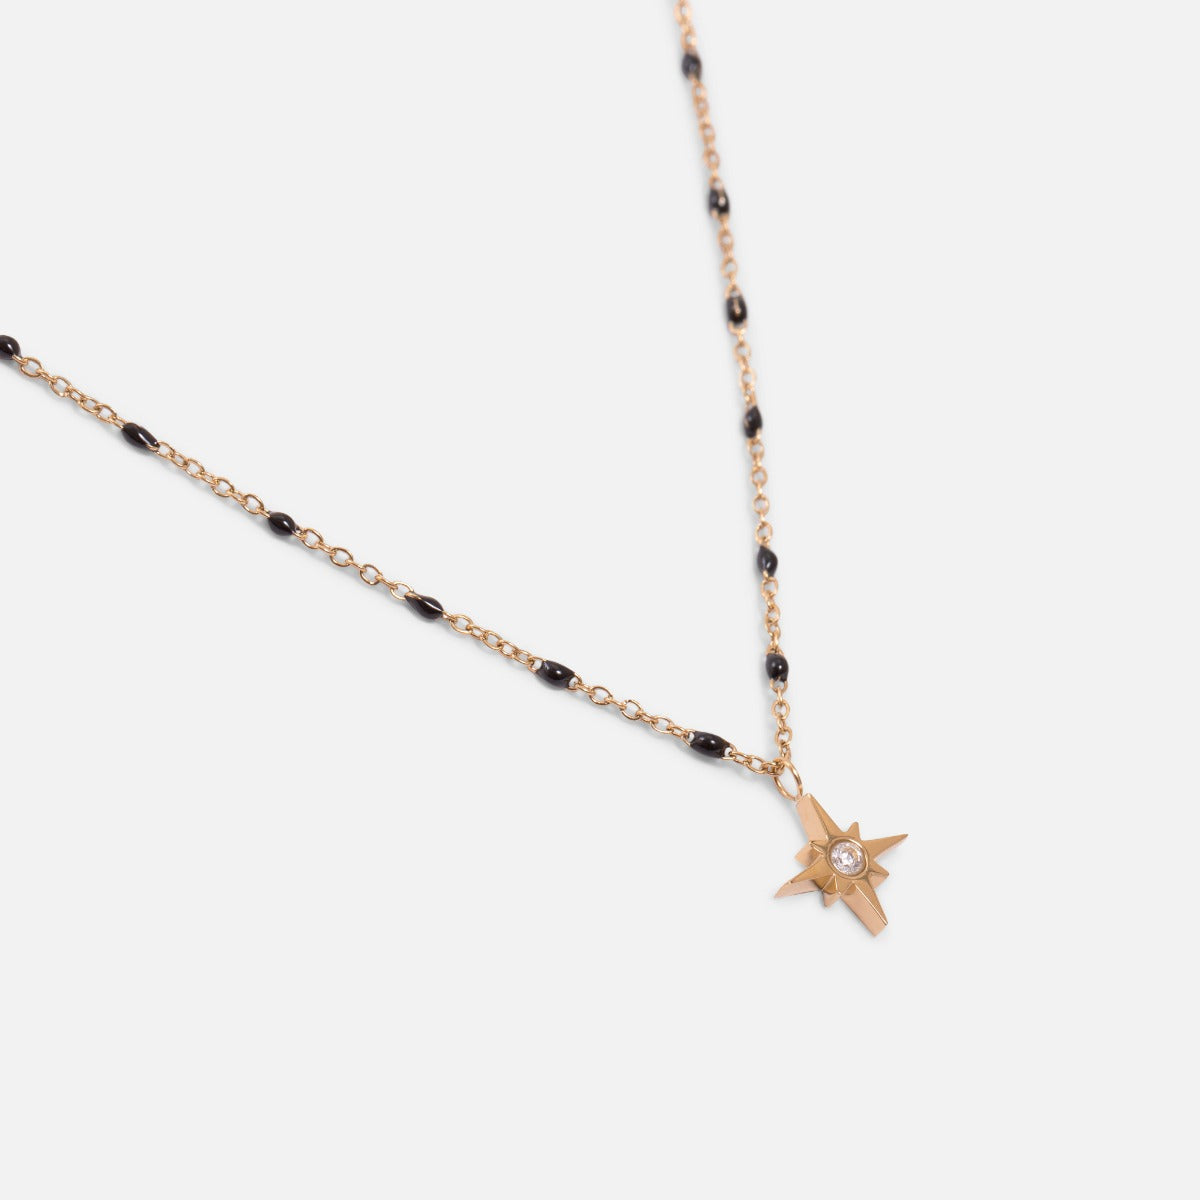 Golden necklace with black beads and star charm in stainless steel